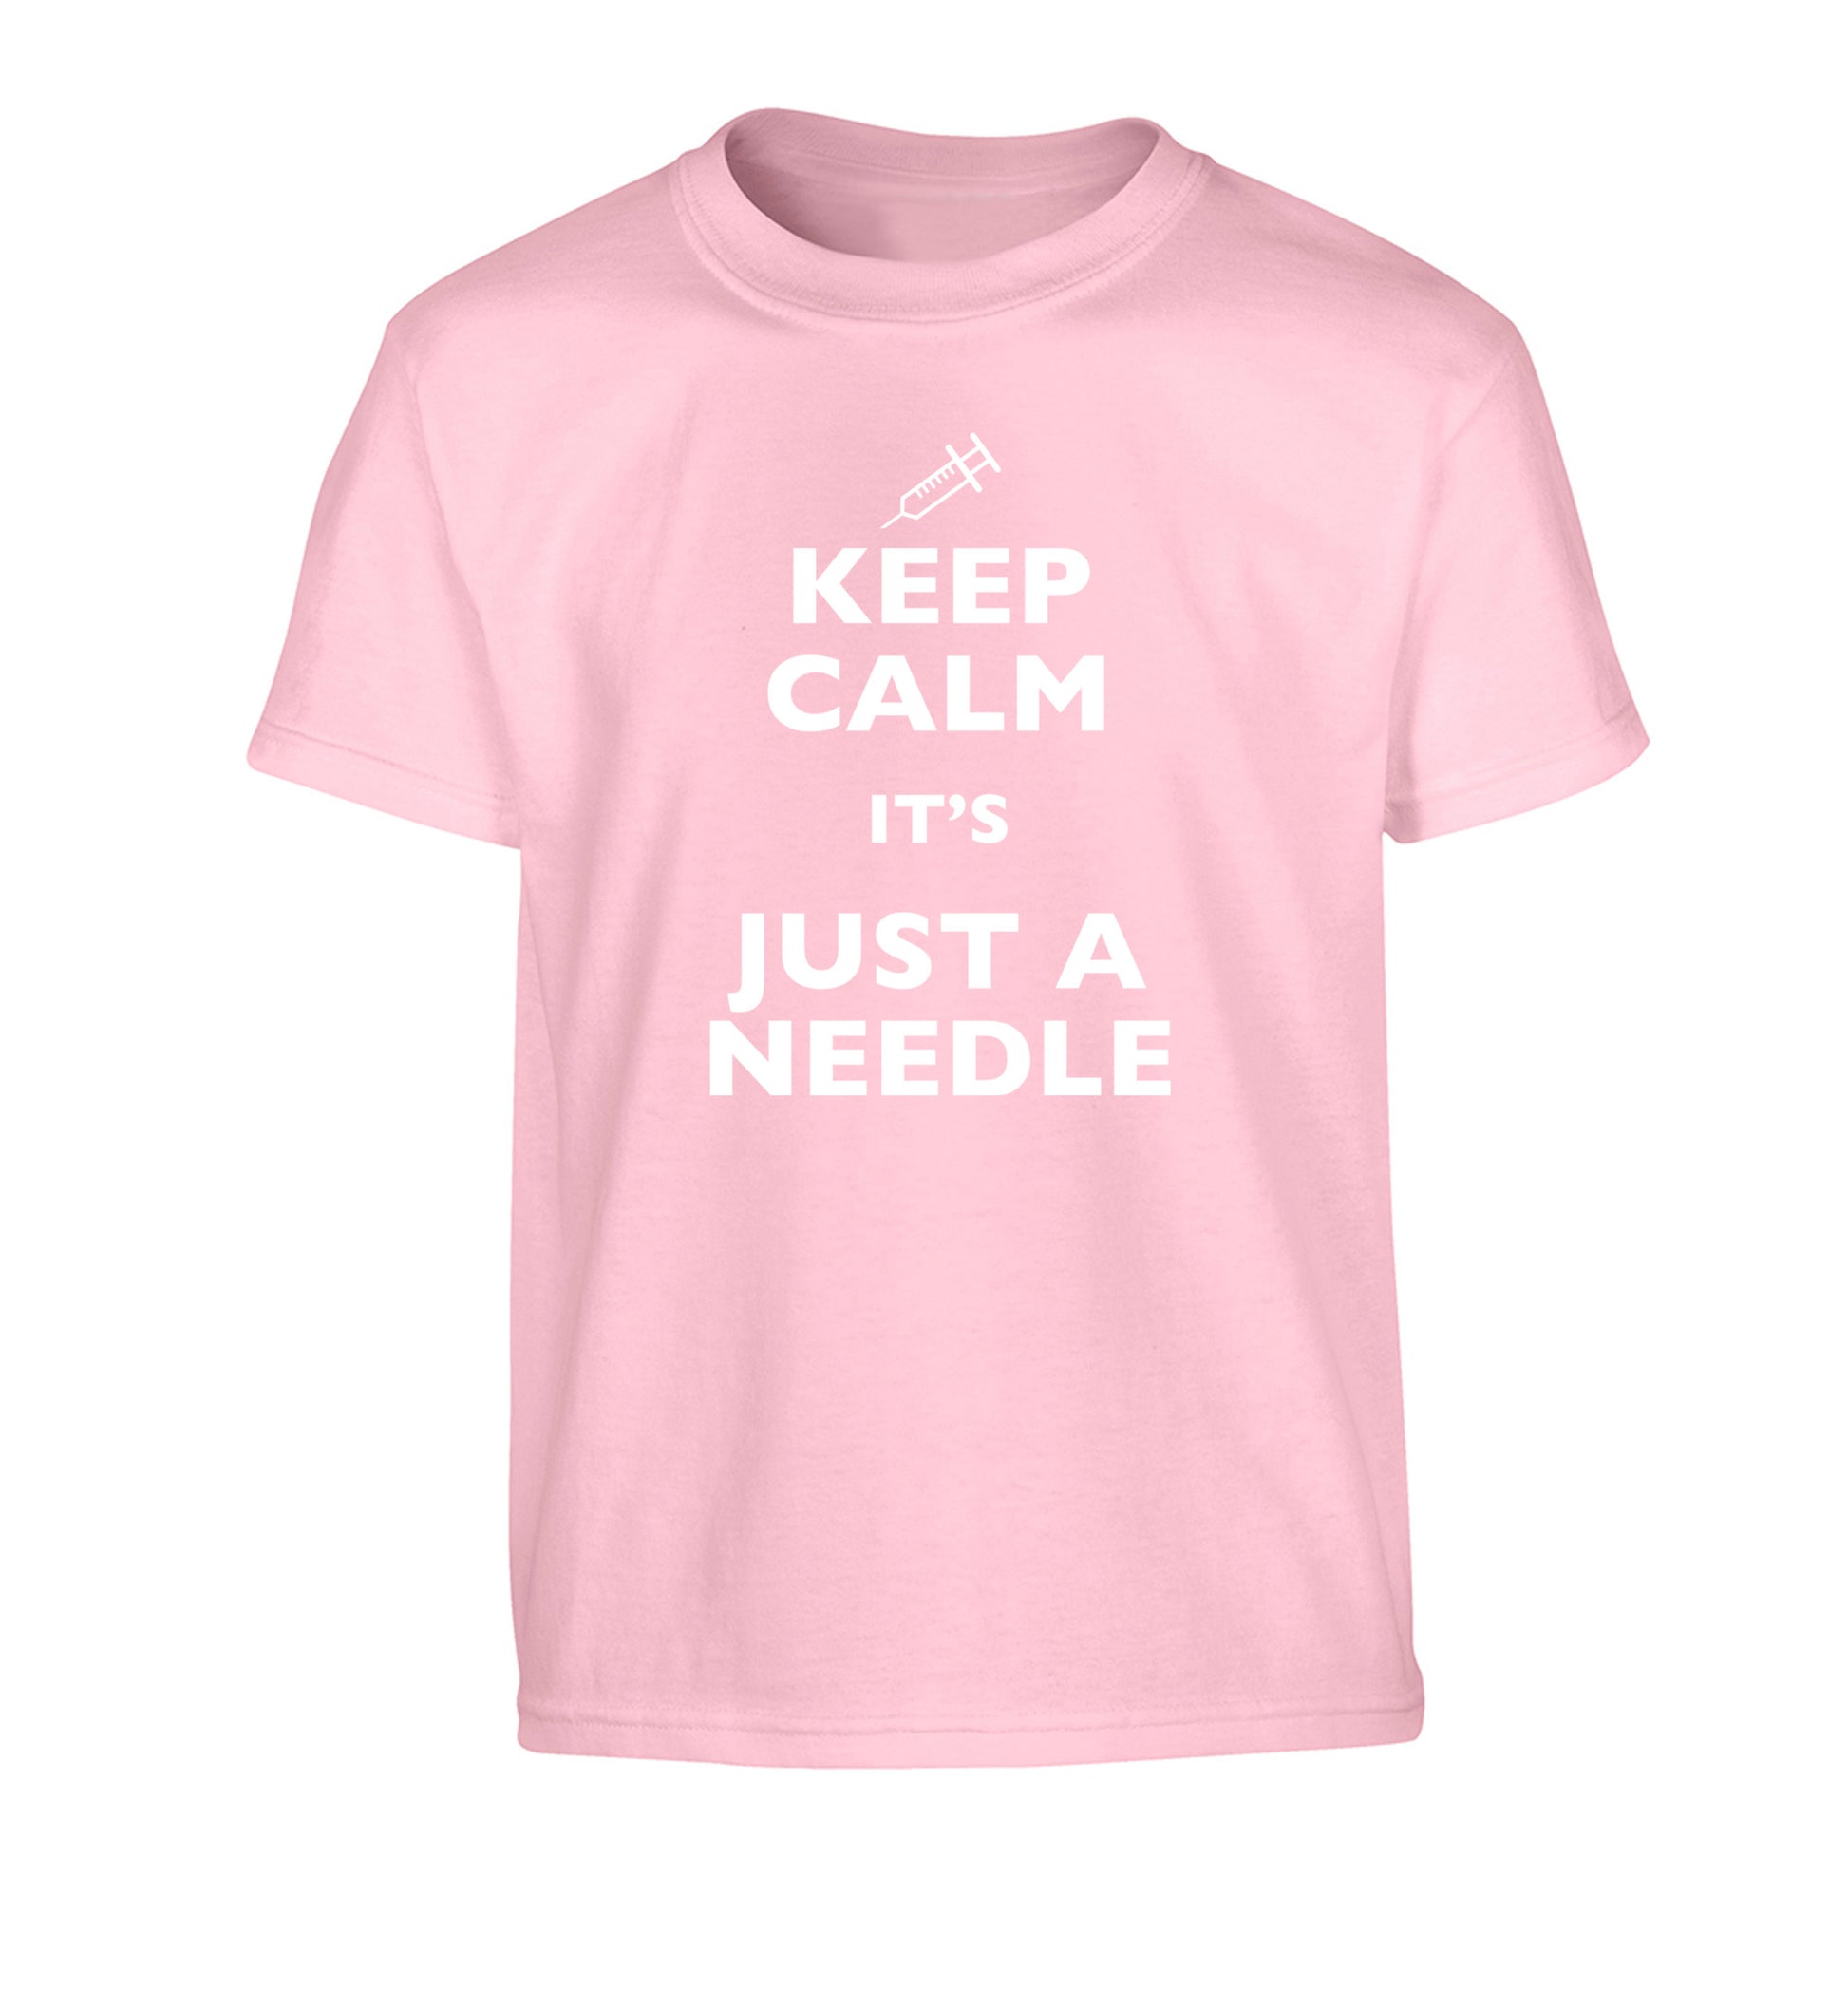 Keep calm it's only a needle Children's light pink Tshirt 12-14 Years